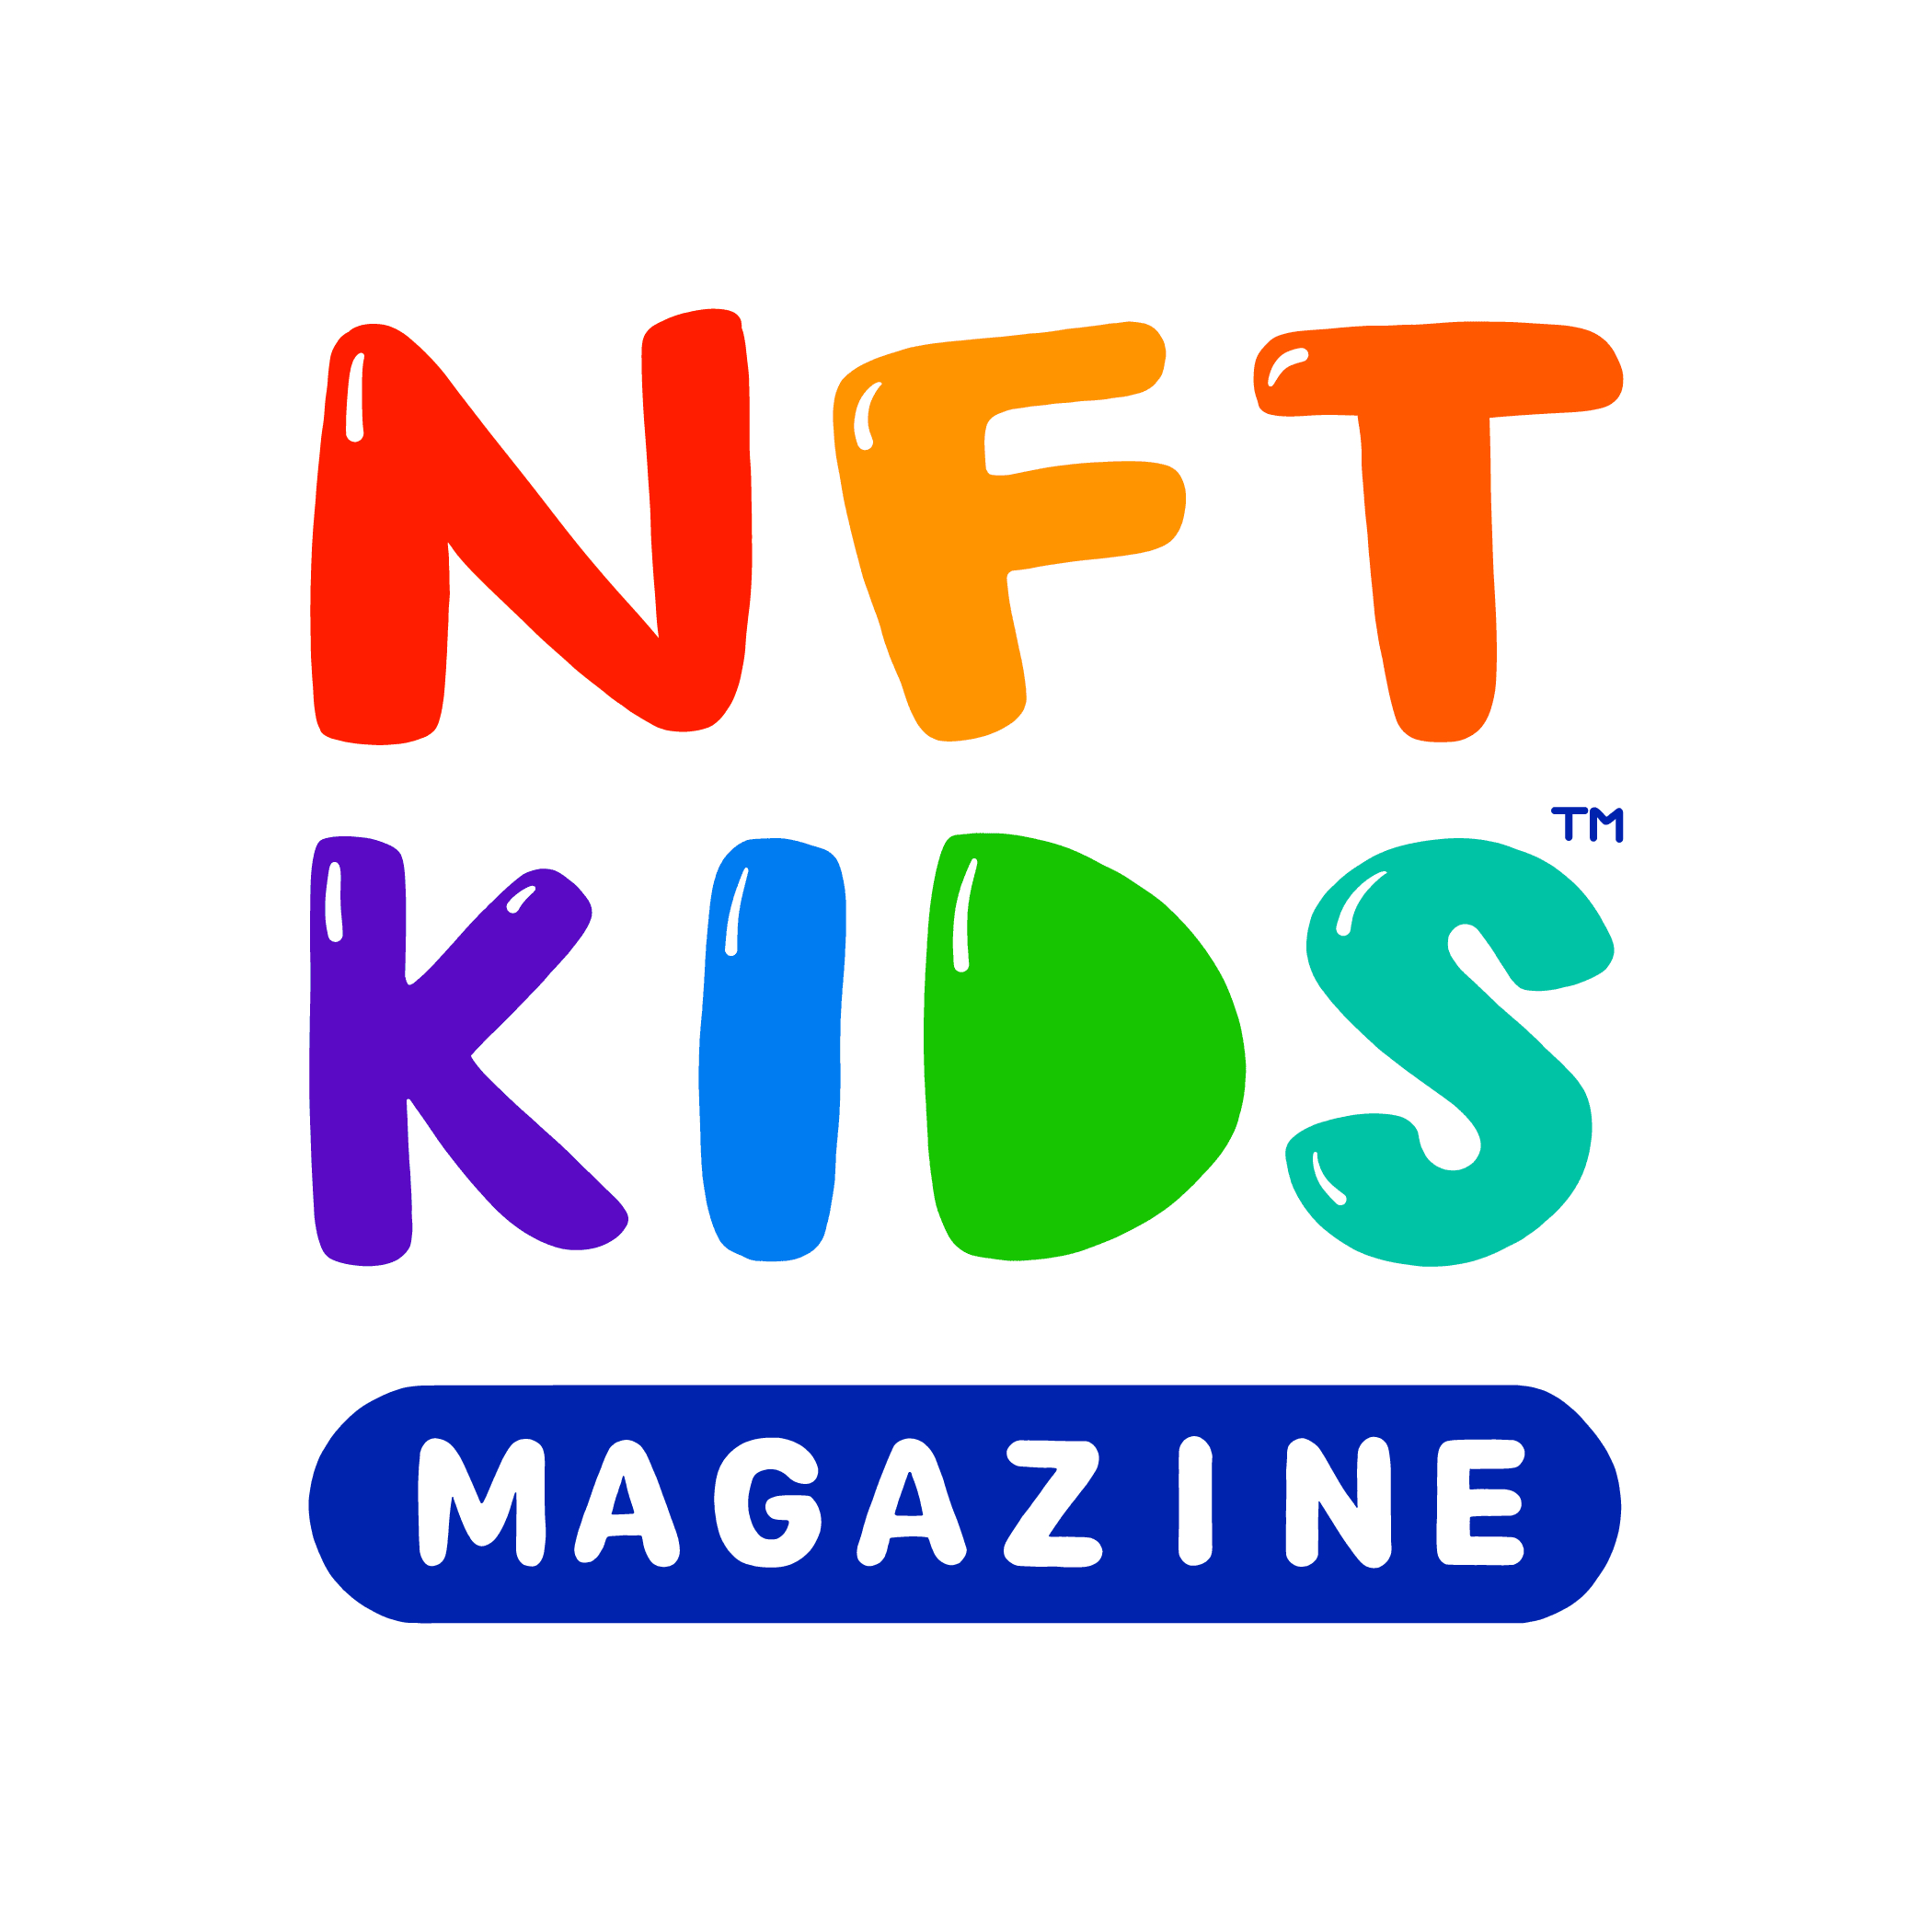 Front Cover of the 1st ever NFT Magazine for Kids